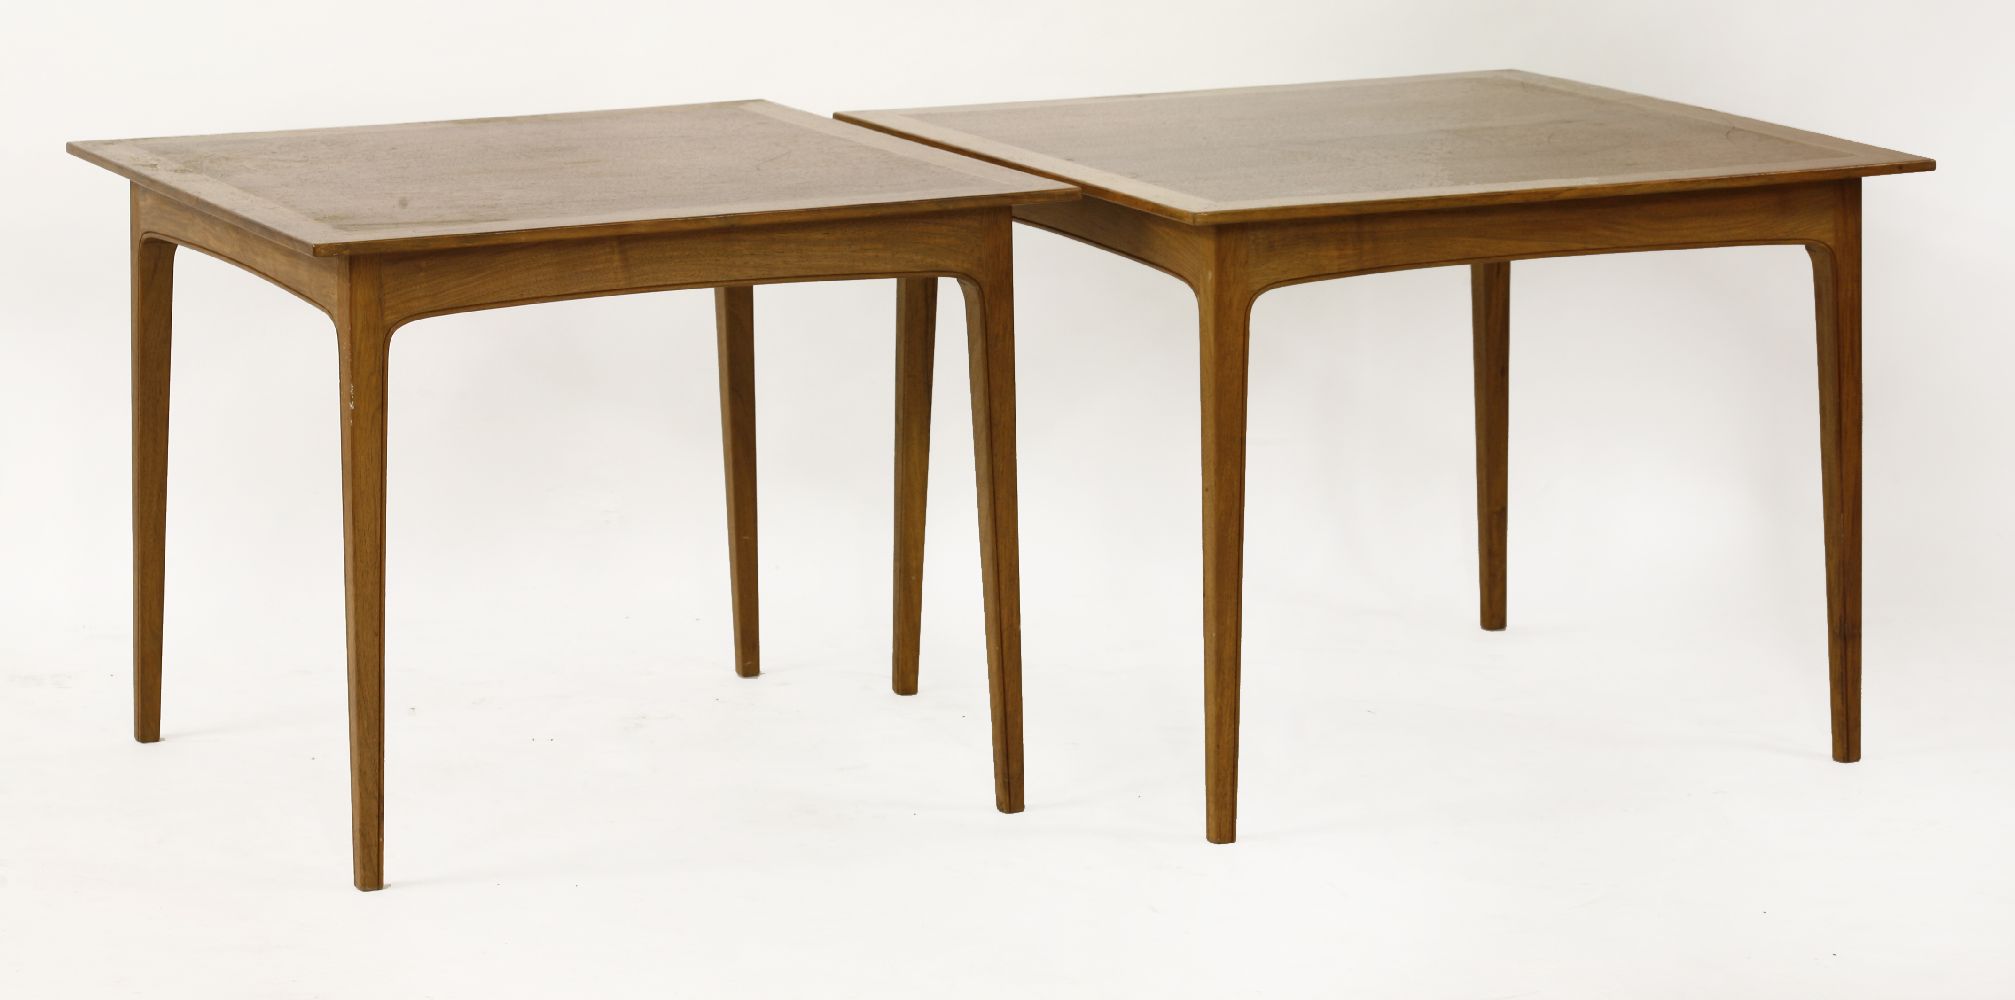 Two Barnsley Workshop tables,with inlaid banding, raised on line cut legs, each stamped 'BARNSLEY',